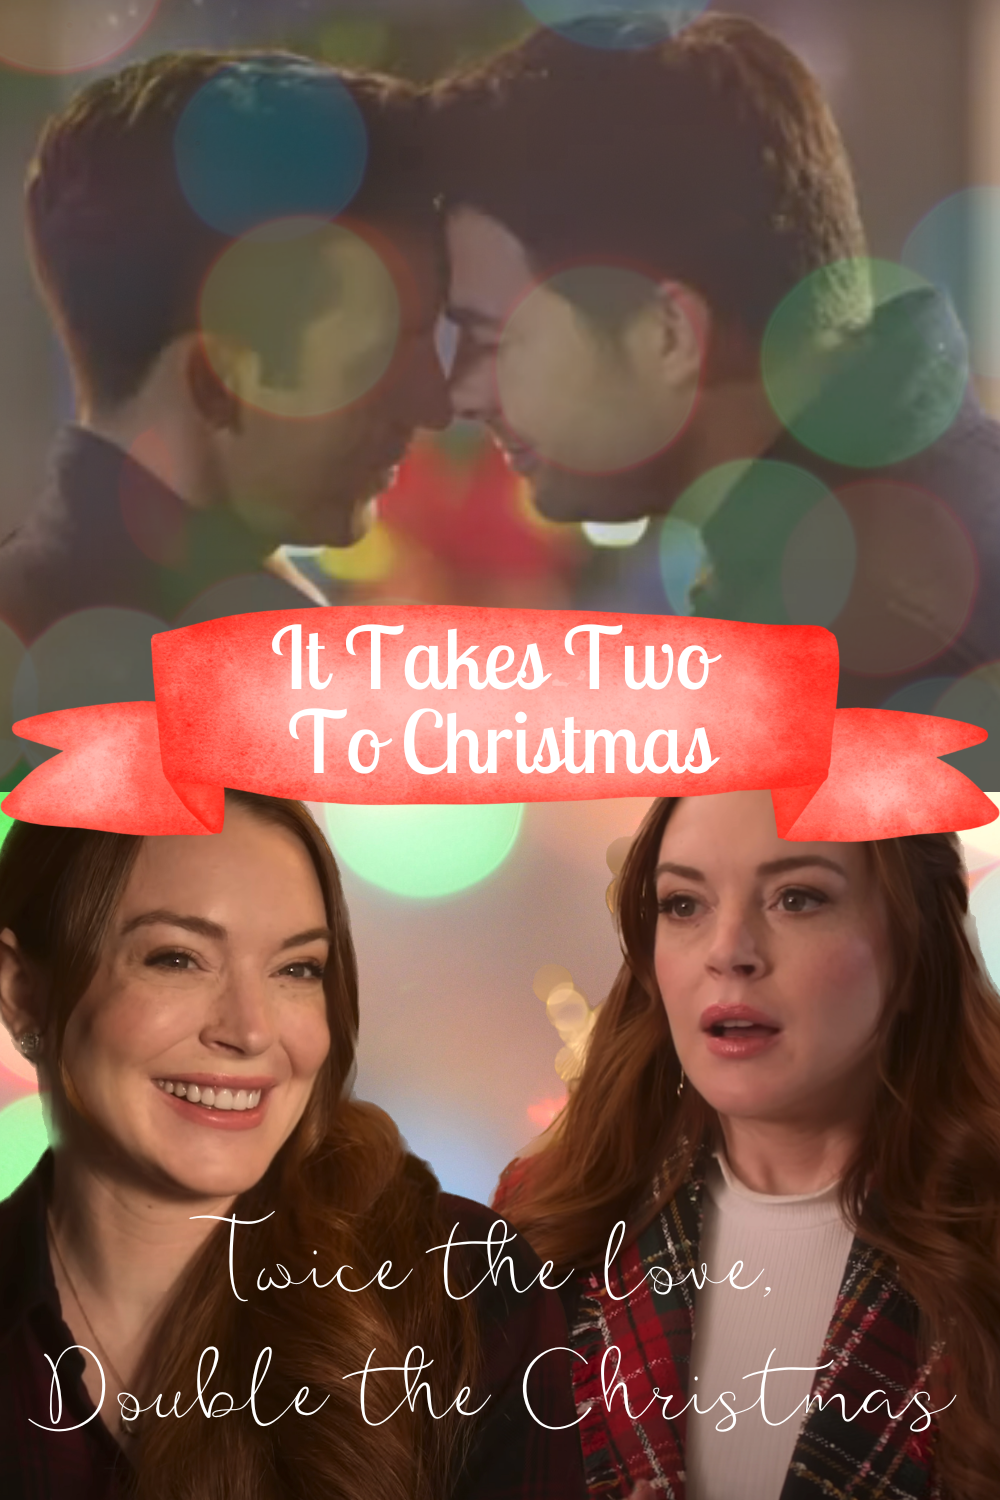 &quot;It takes Two to Christmas&quot;